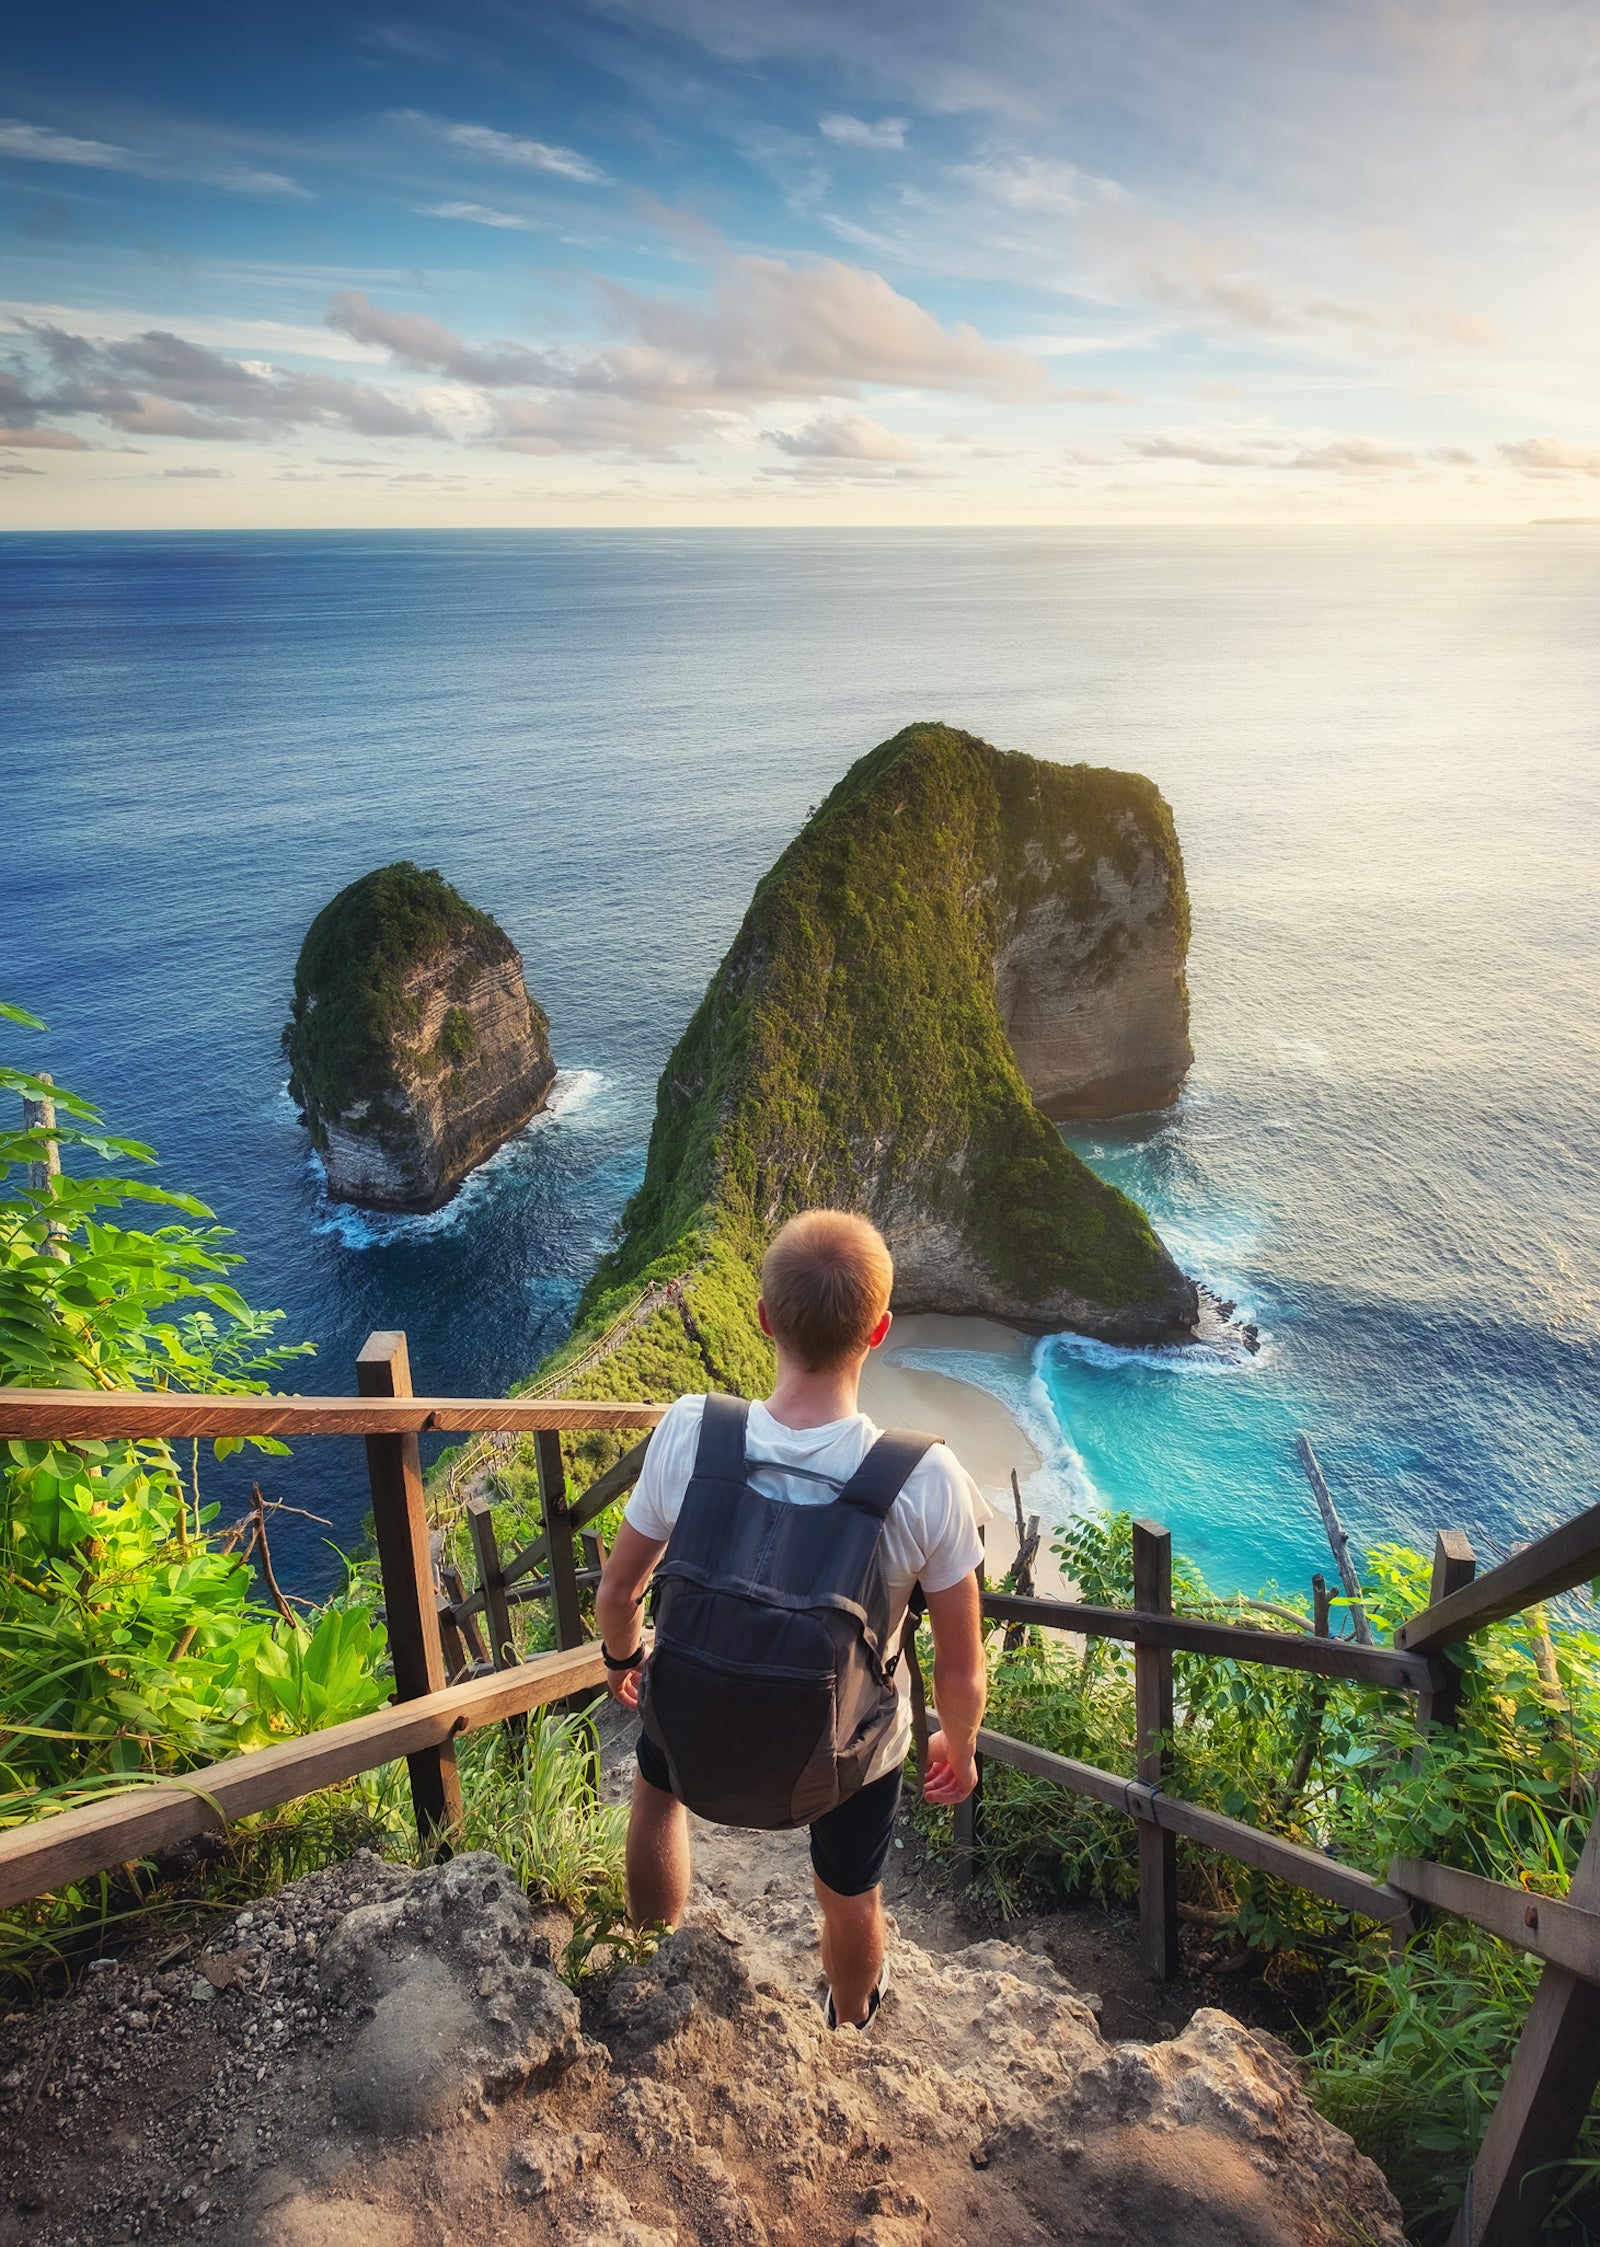 Does Bali plan to ban backpackers and budget travelers?